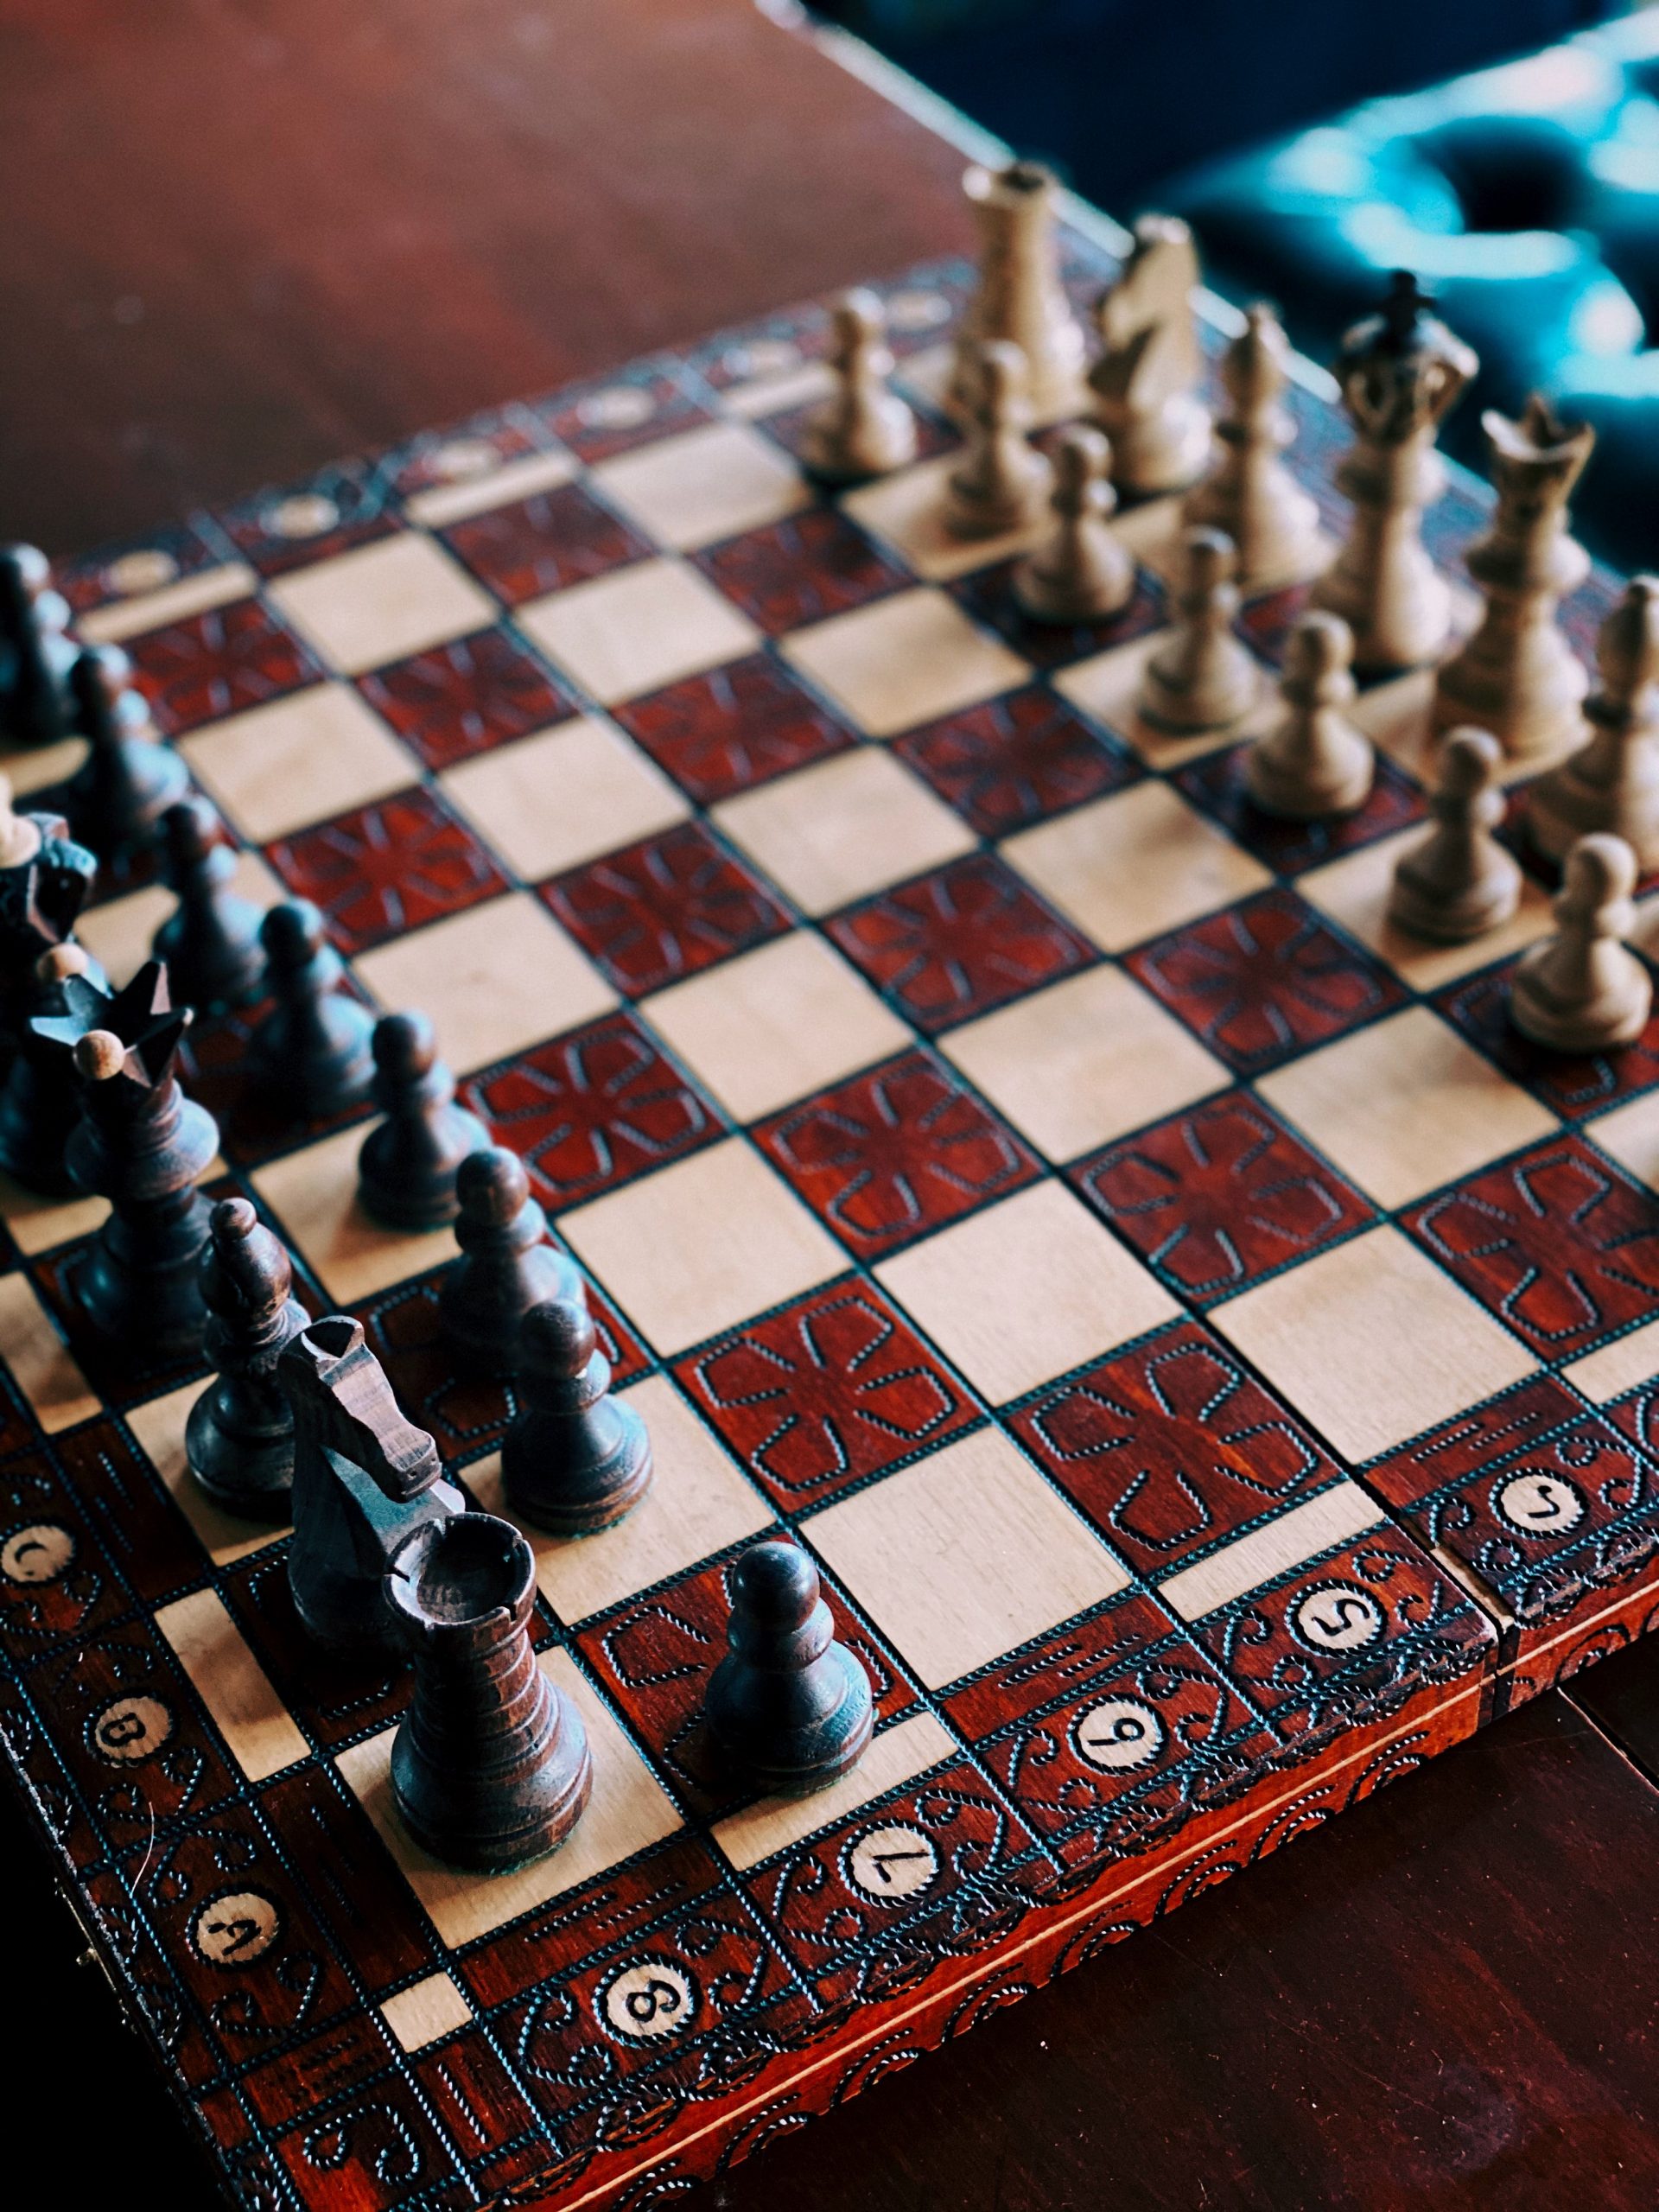 International Chess Day 2022: What are the benefits of playing this board game?